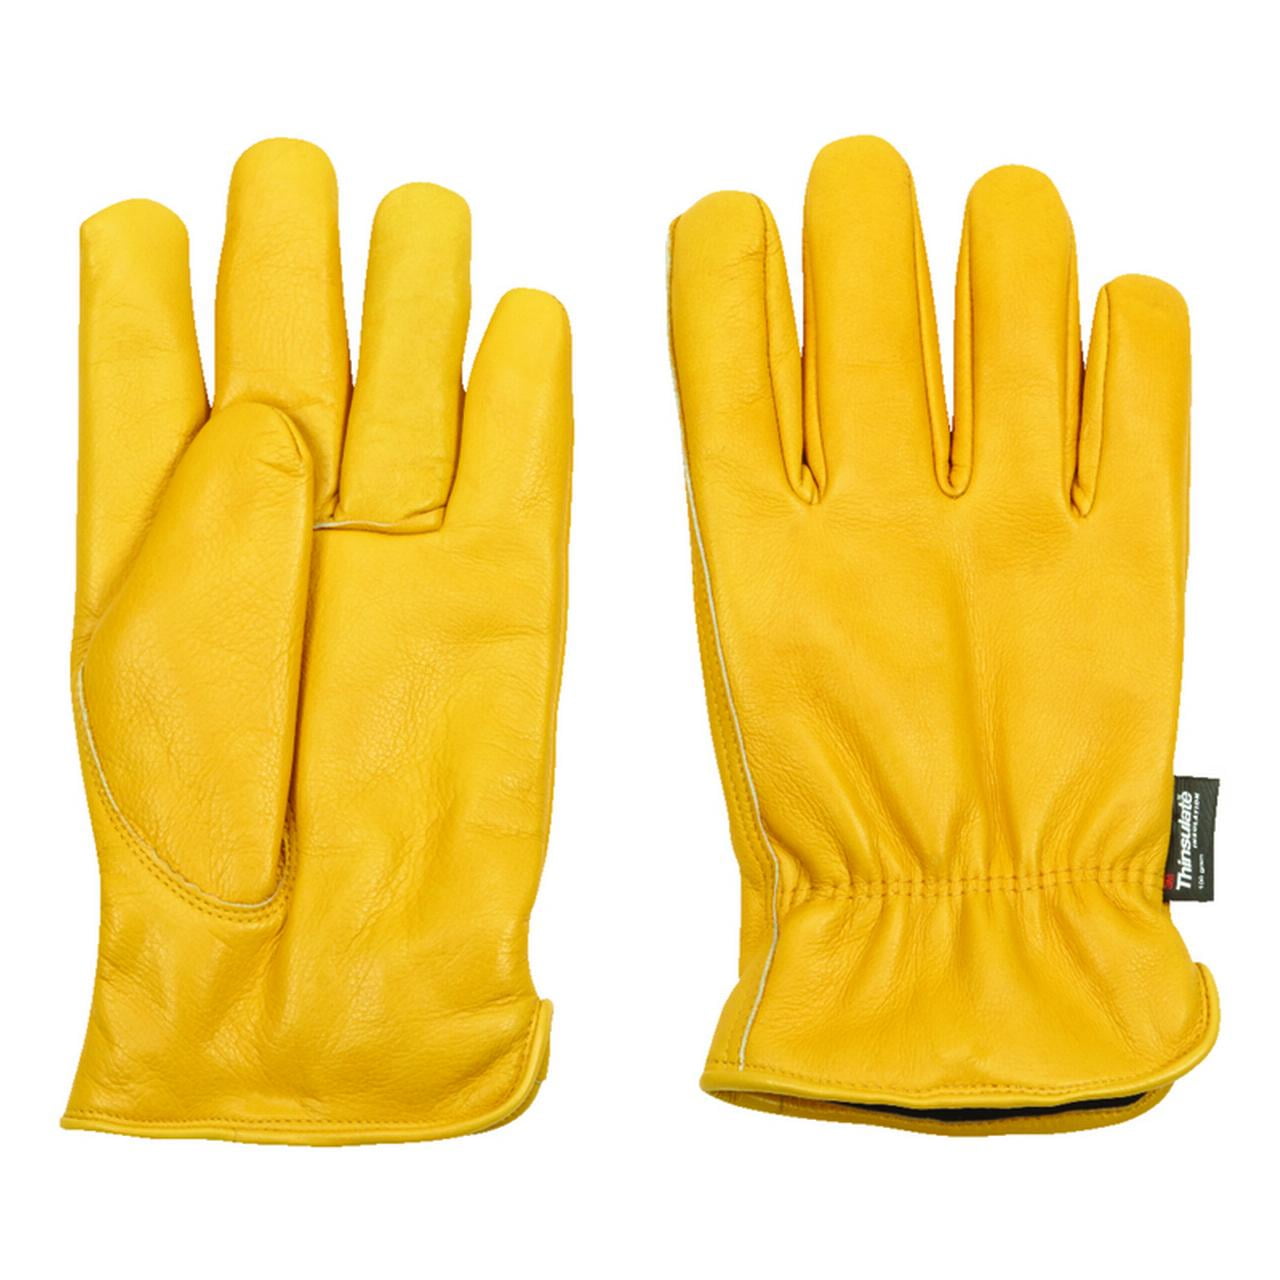 Medium Wells Lamont 1167M Leather Work Gloves with HydraHyde Technology 